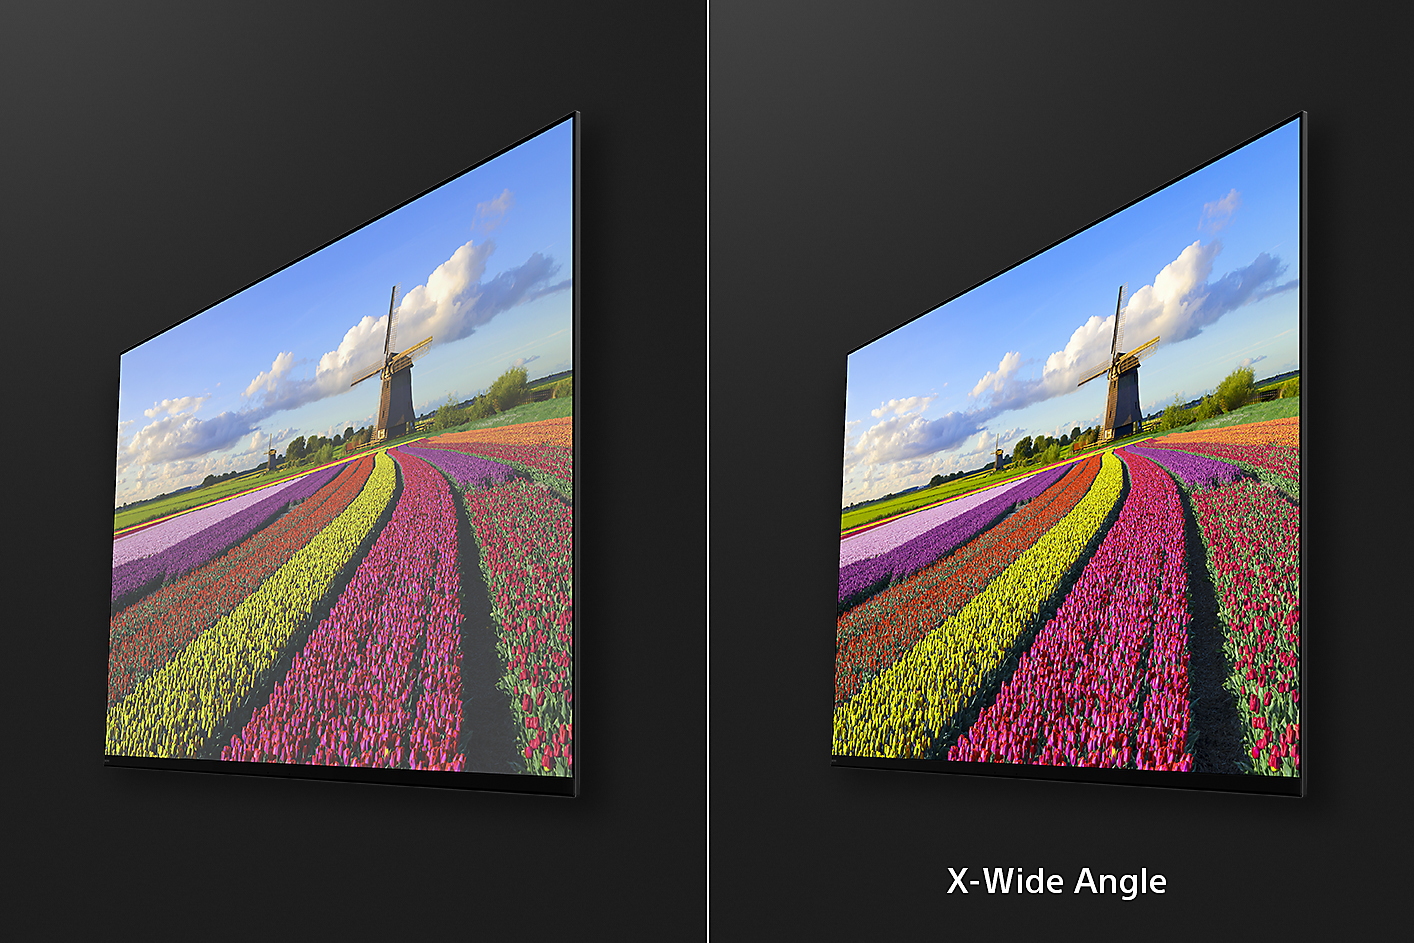 Two angled screenshots of flowers in a field with right image showing the benefits of X-Wide Angle